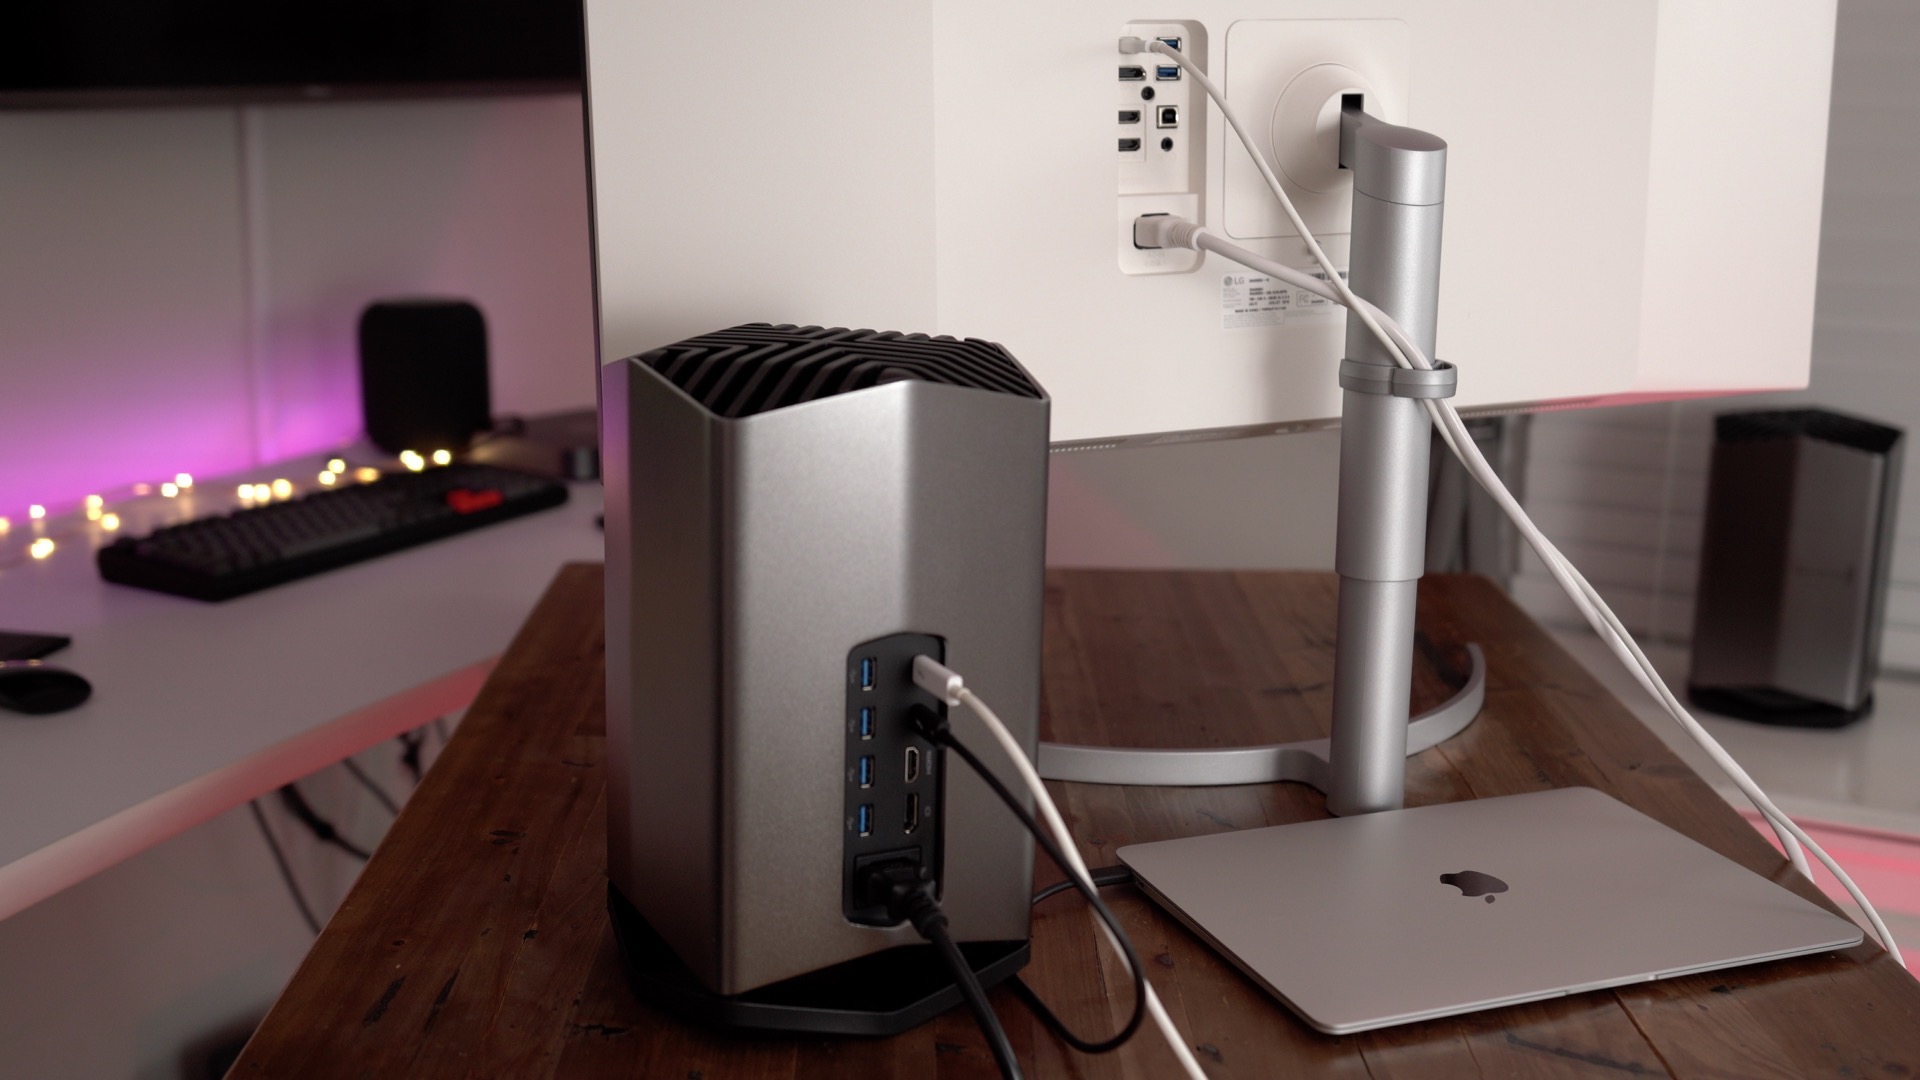 Review: Blackmagic eGPU Pro is more powerful and capable - 9to5Mac